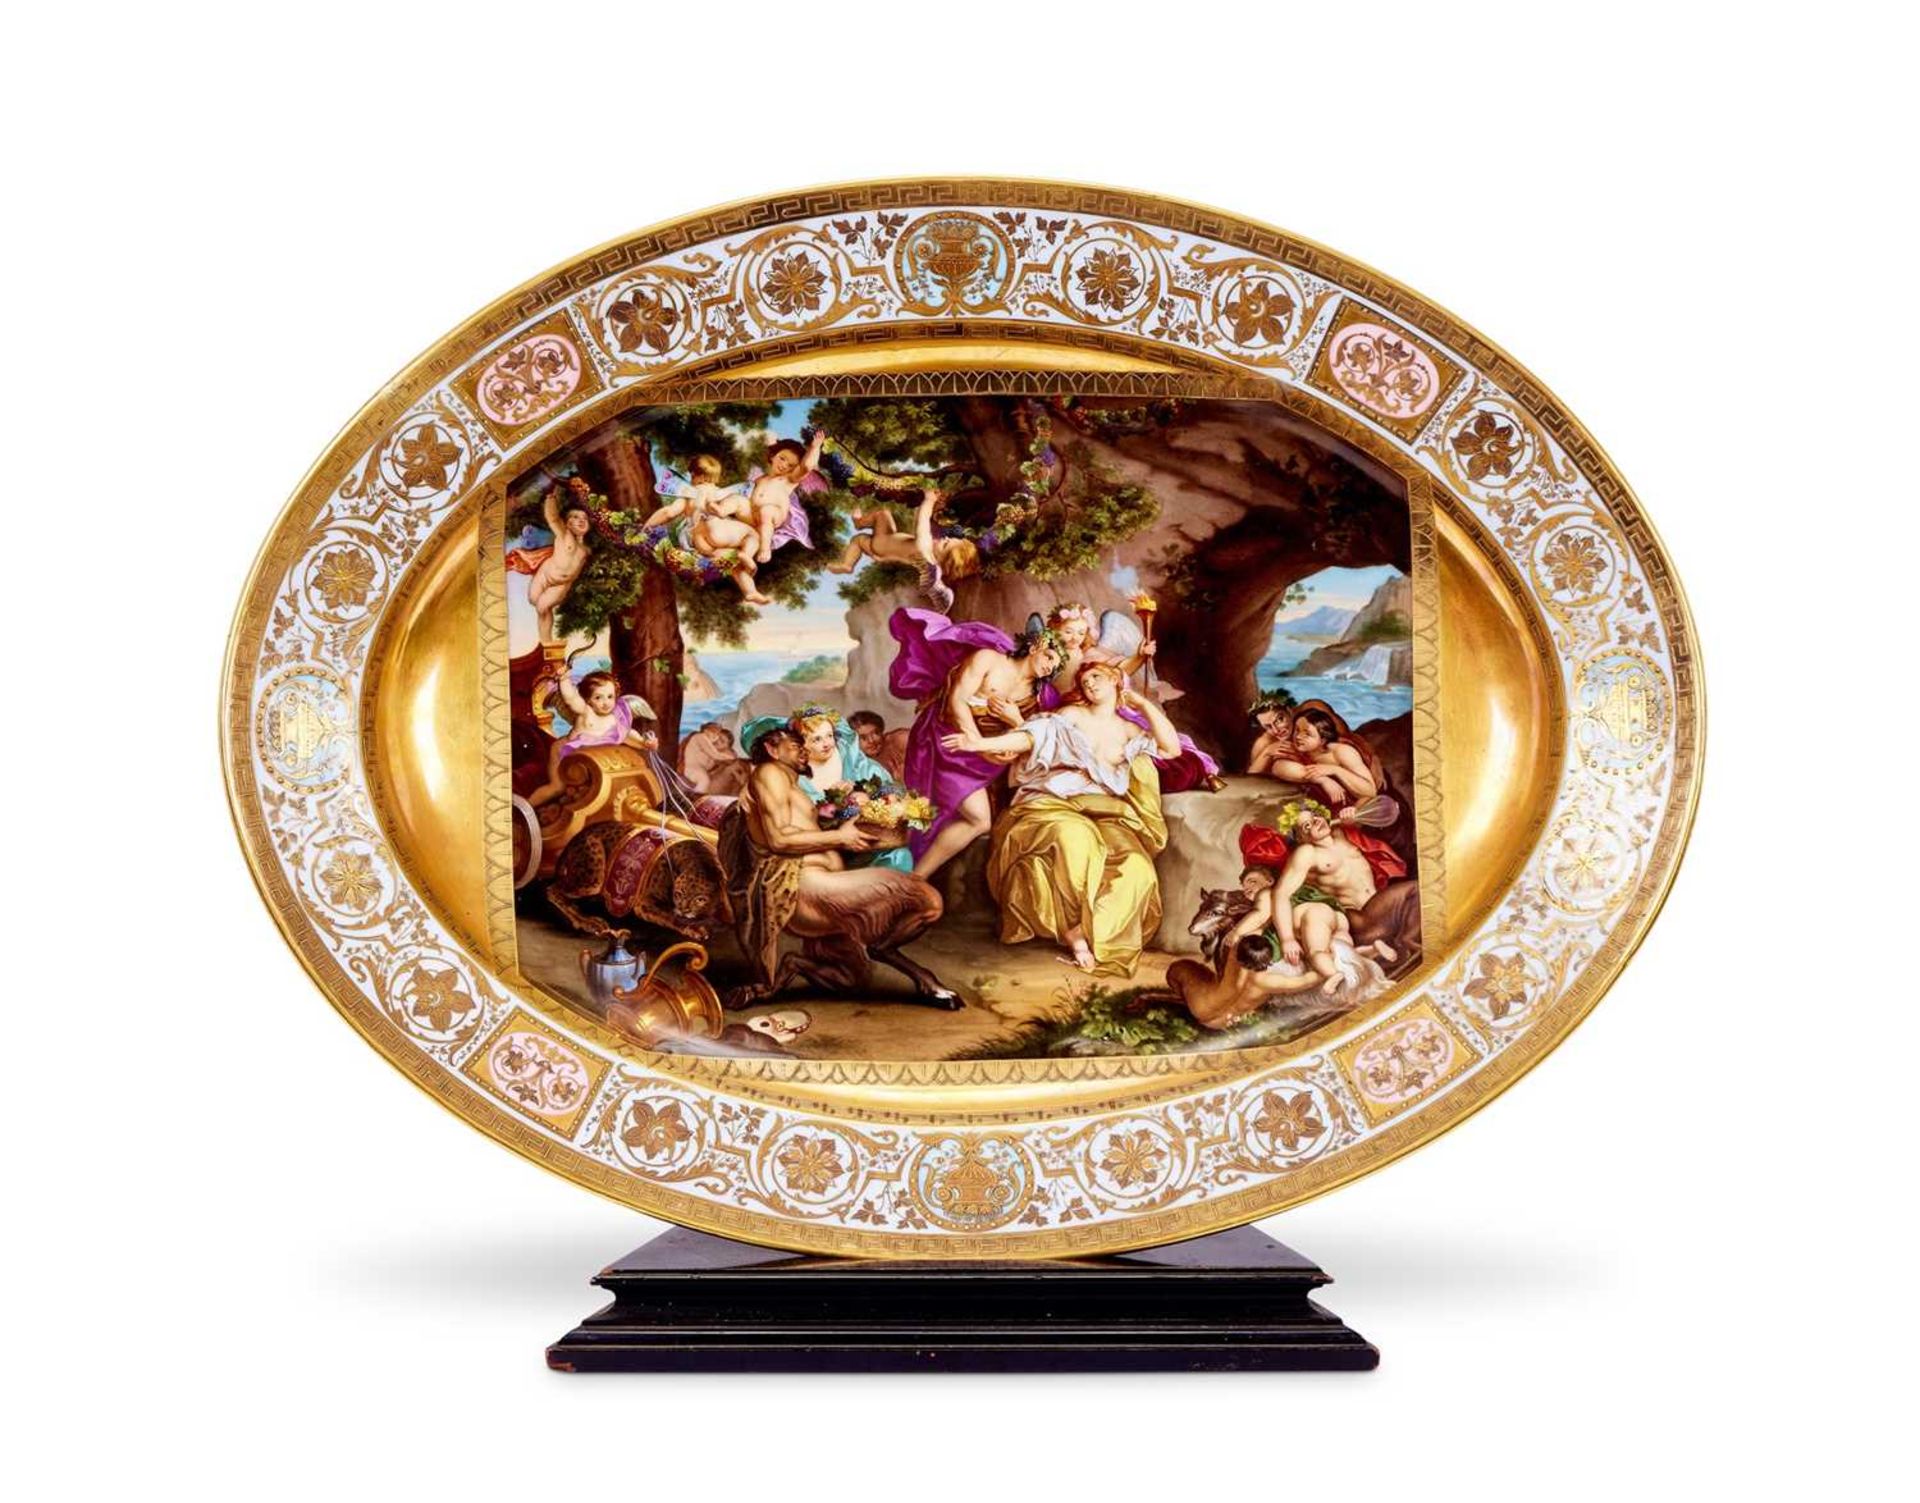 A FINE AND LARGE 19TH CENTURY VIENNA PORCELAIN DISH DEPICTING BACCHUS AND ARIADNE - Image 2 of 5